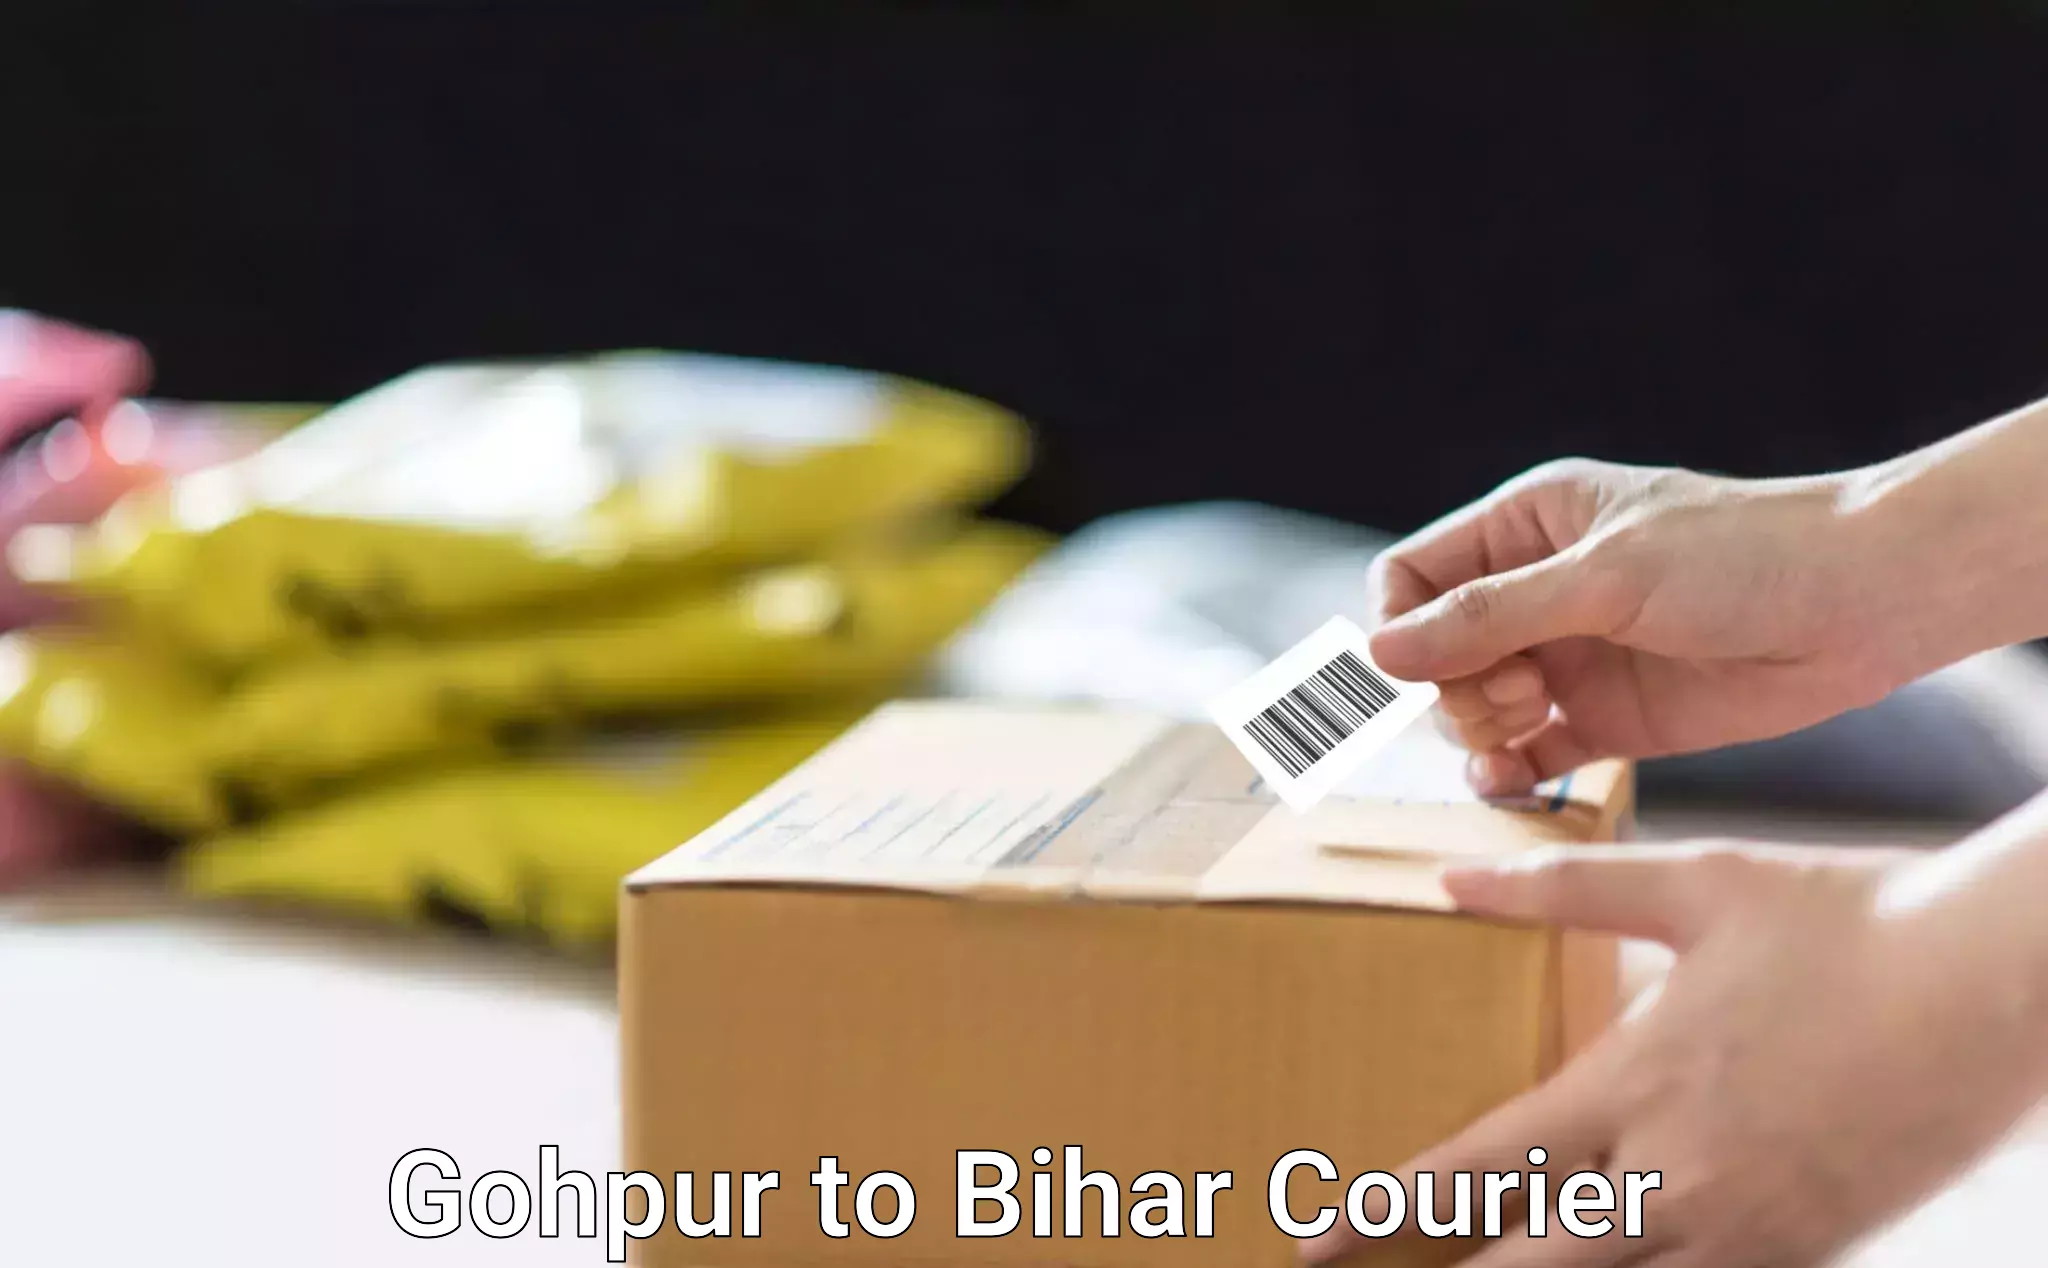 Express postal services in Gohpur to Bihar